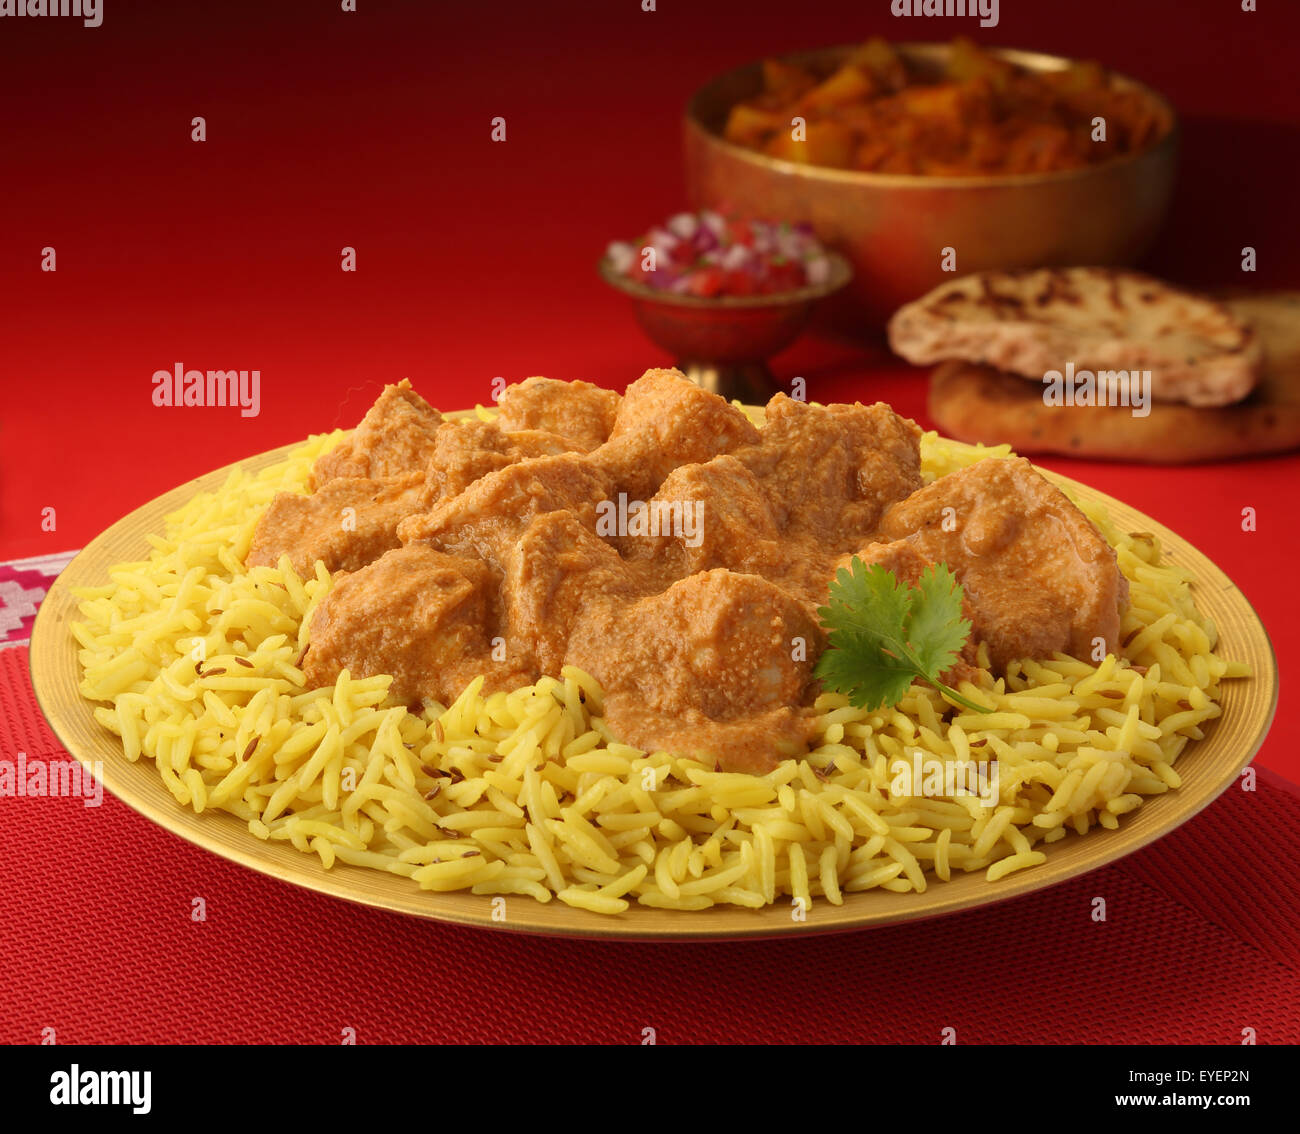 INDIAN CHICKEN KORMA MEAT CURRY MEAL Stock Photo